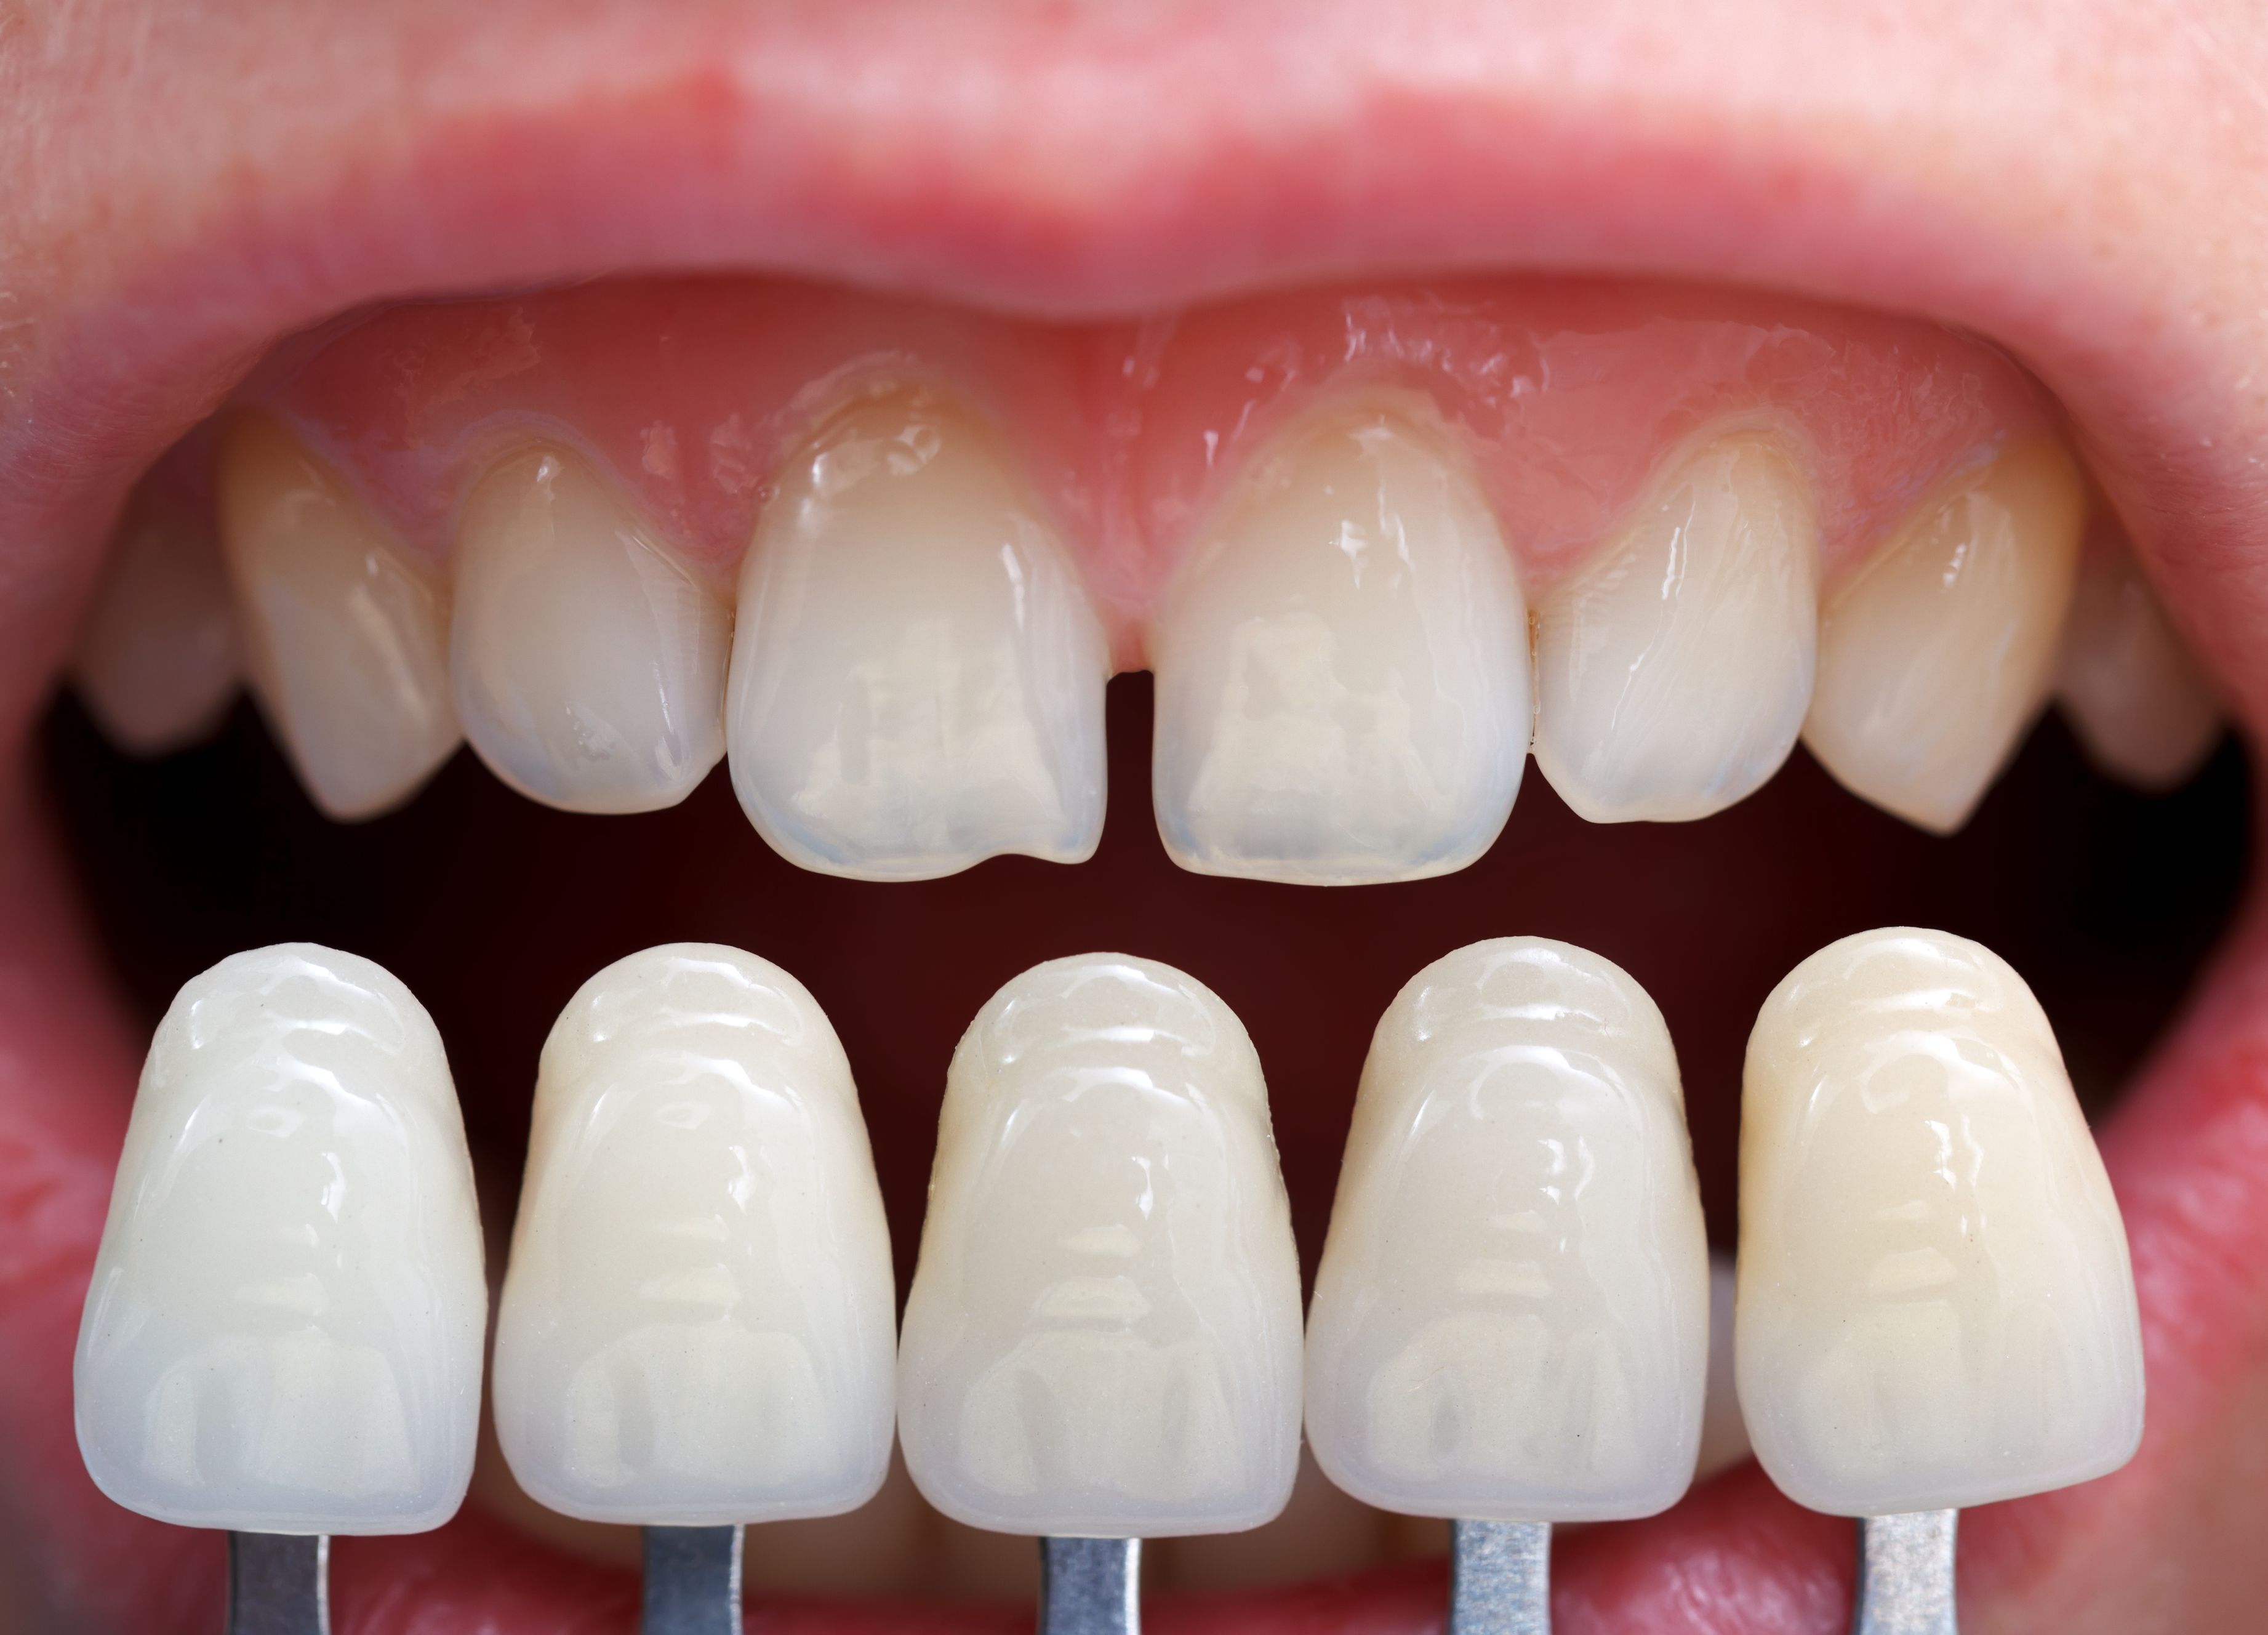 Where can I find a Cosmetic Dentist in Friendswood?